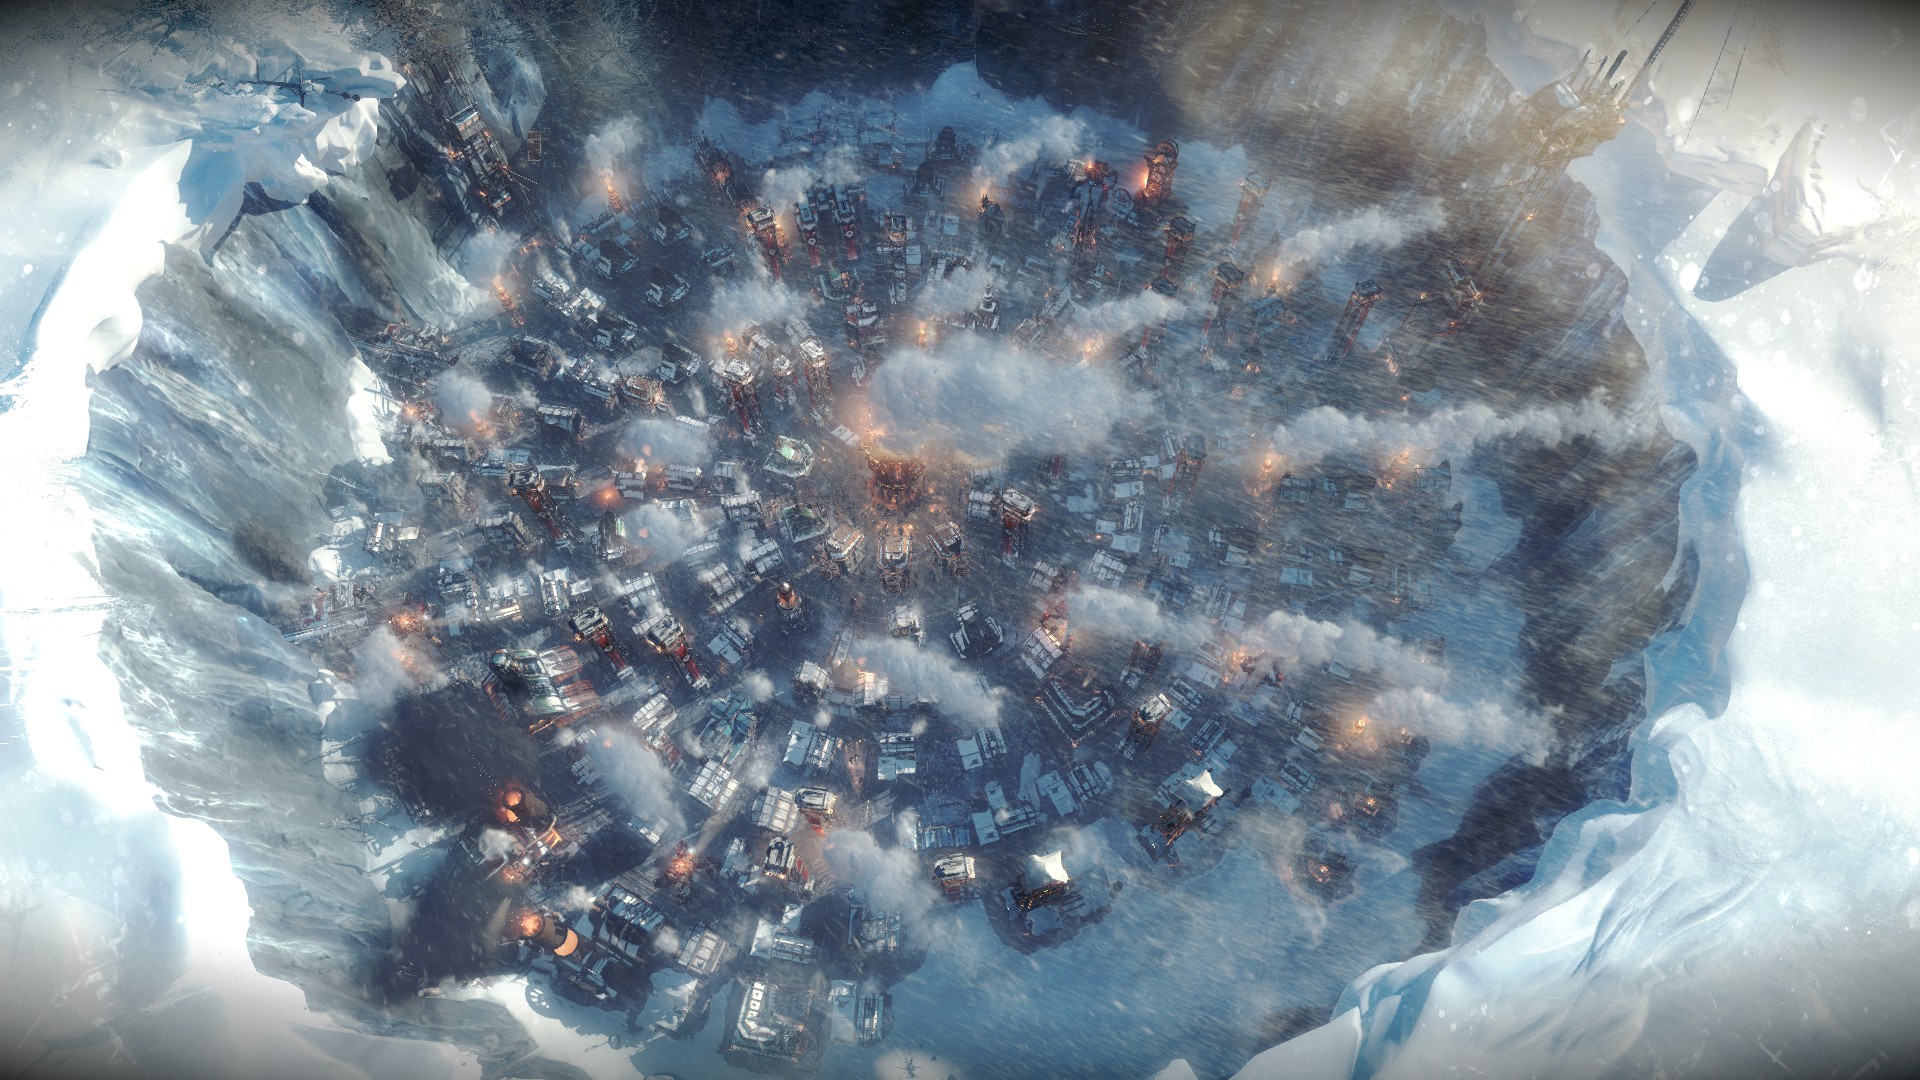 frostpunk 2 review